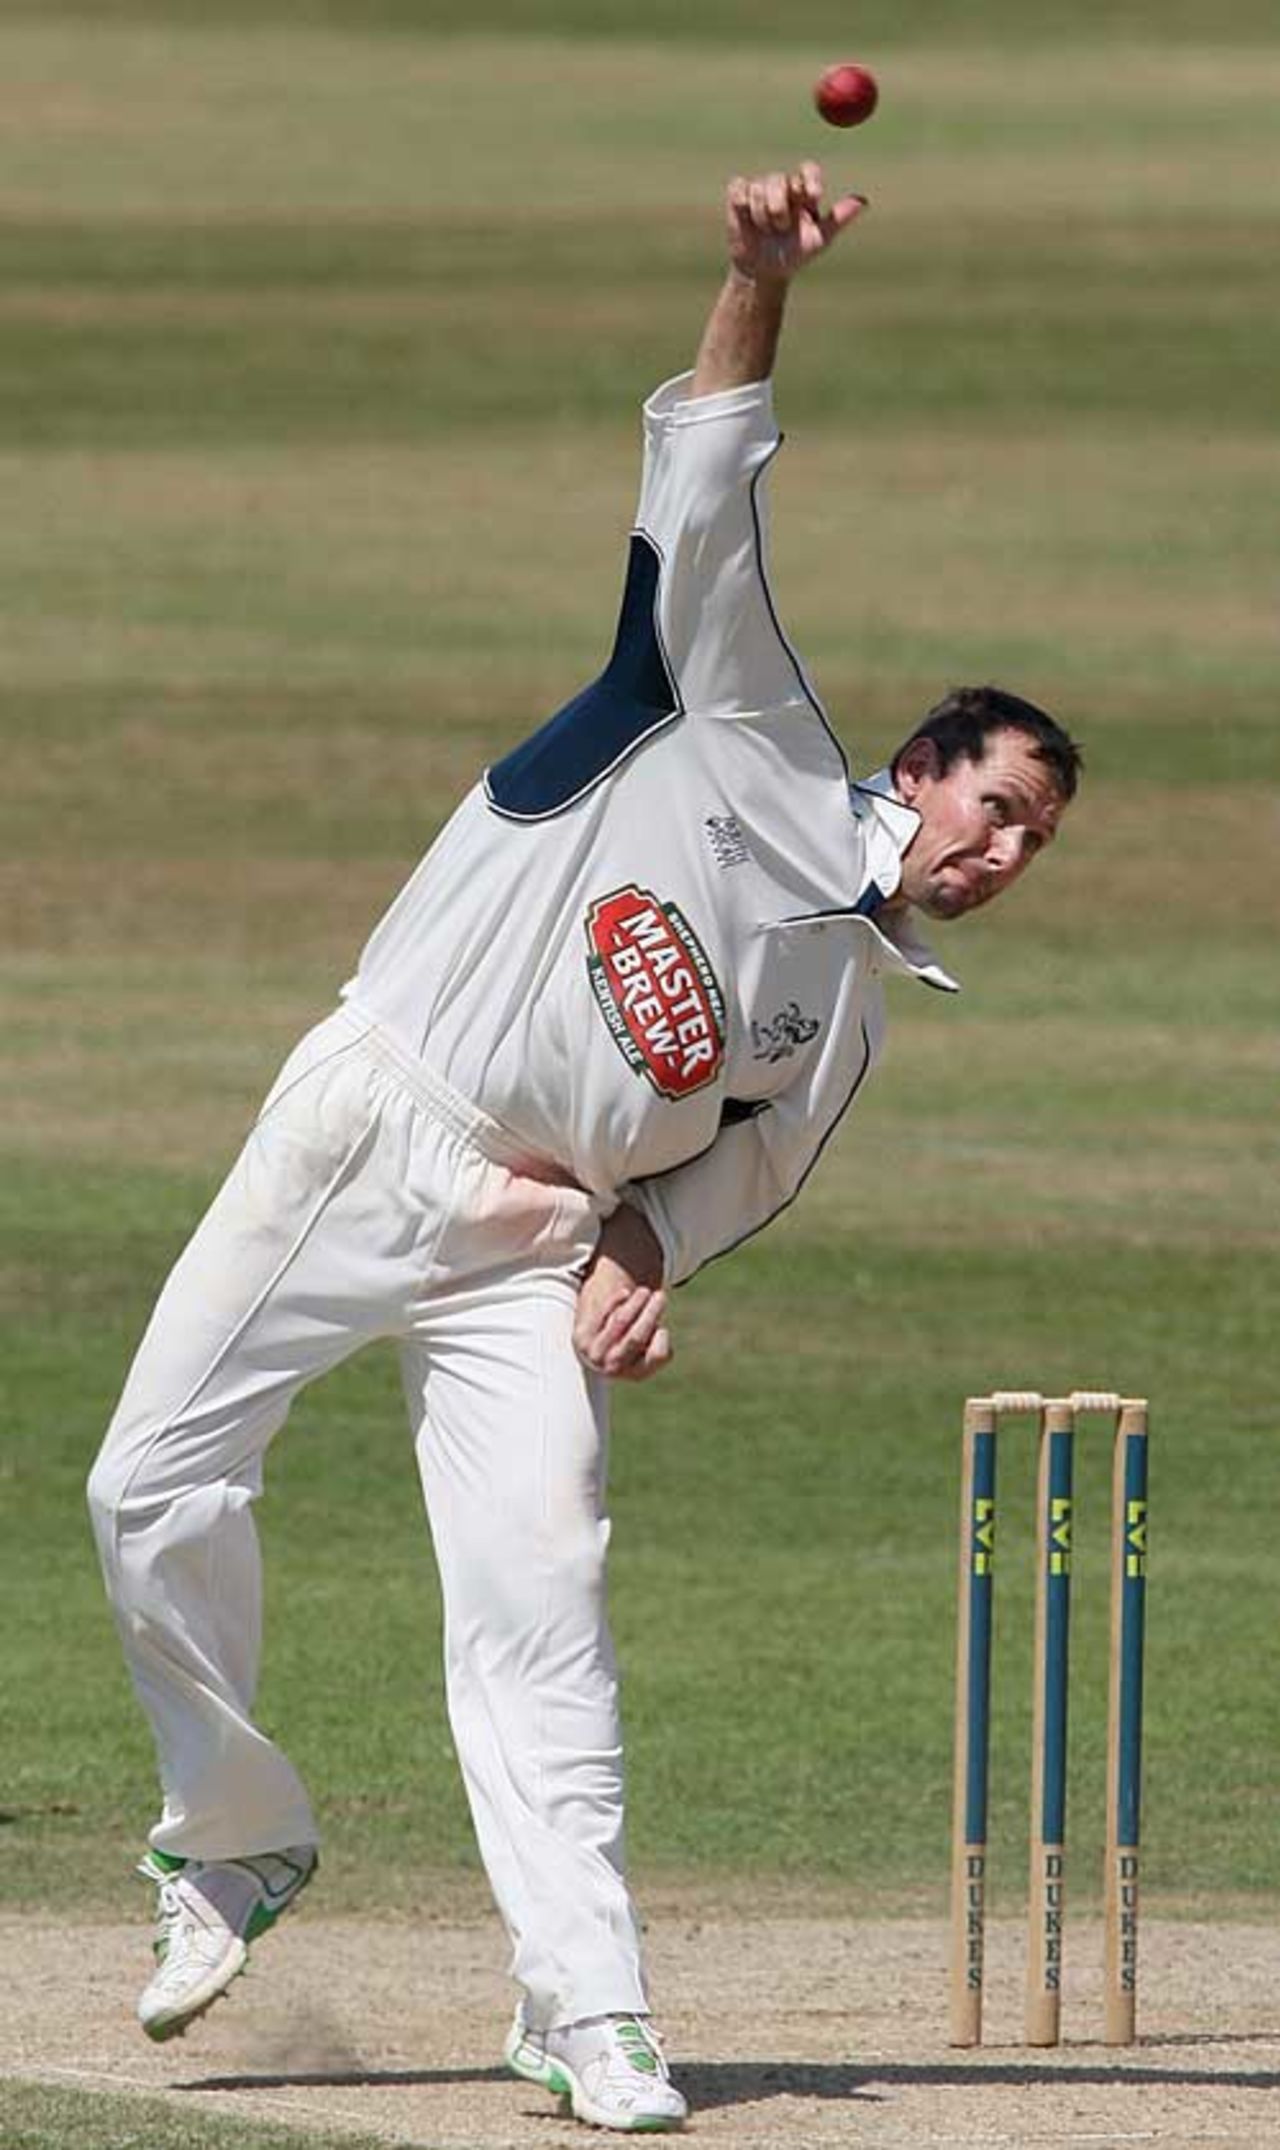 Martin van Jaarsveld claimed a career-best five-wicket haul, Surrey v Kent, 3rd day, The Oval, July 1, 2008